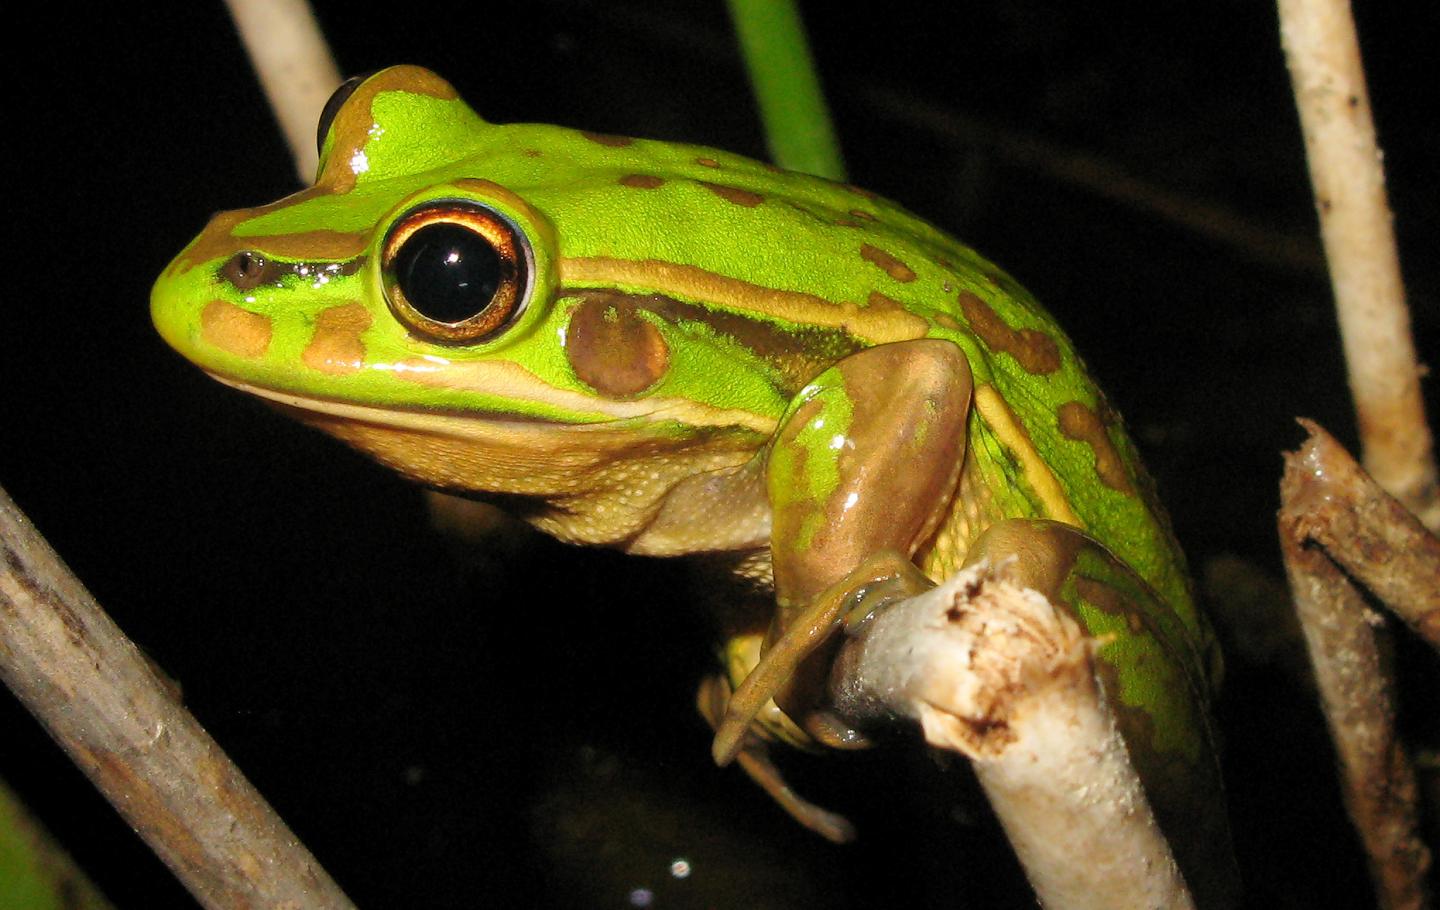 Frog Reproduction in Created Ponds May Be Affected by Disease and Food Availability